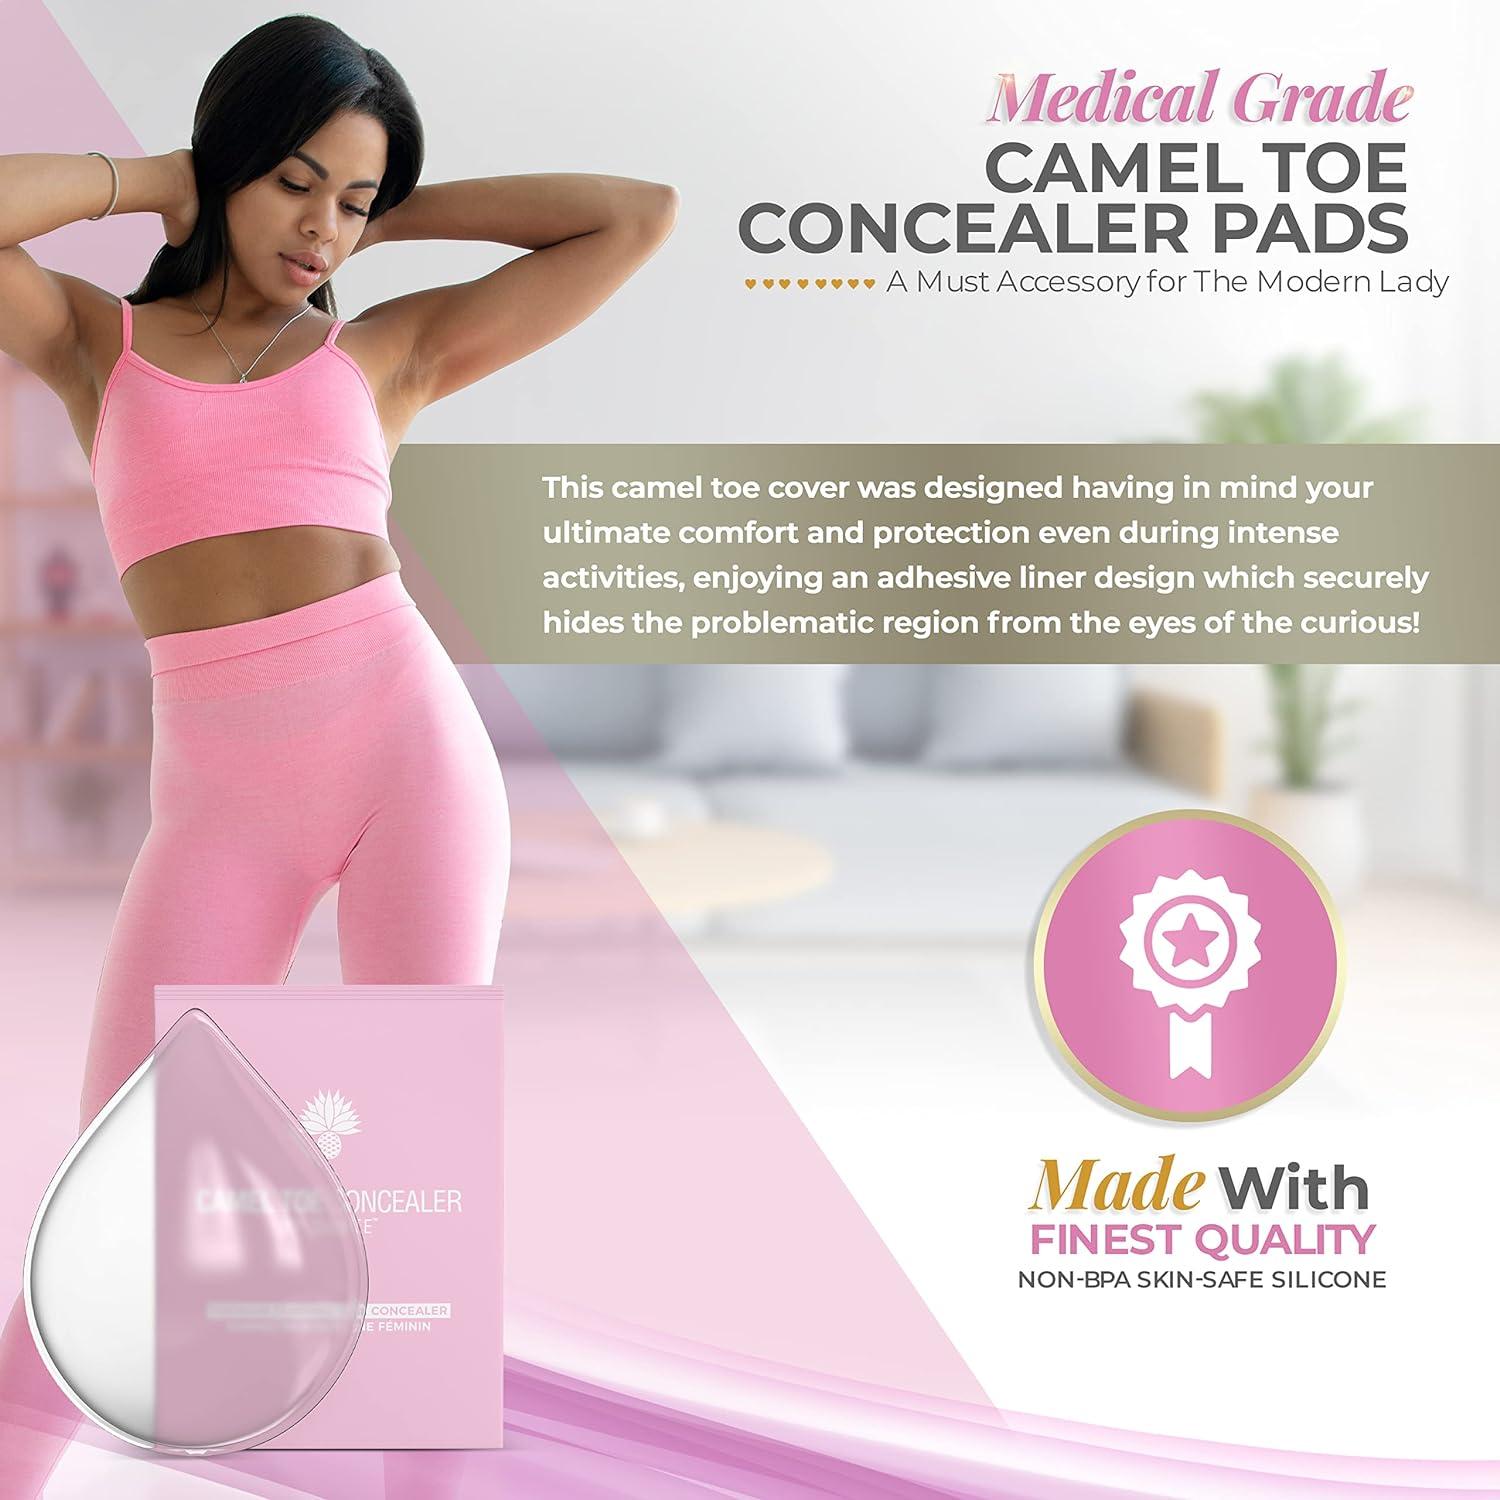 All about Camel Toe Cover